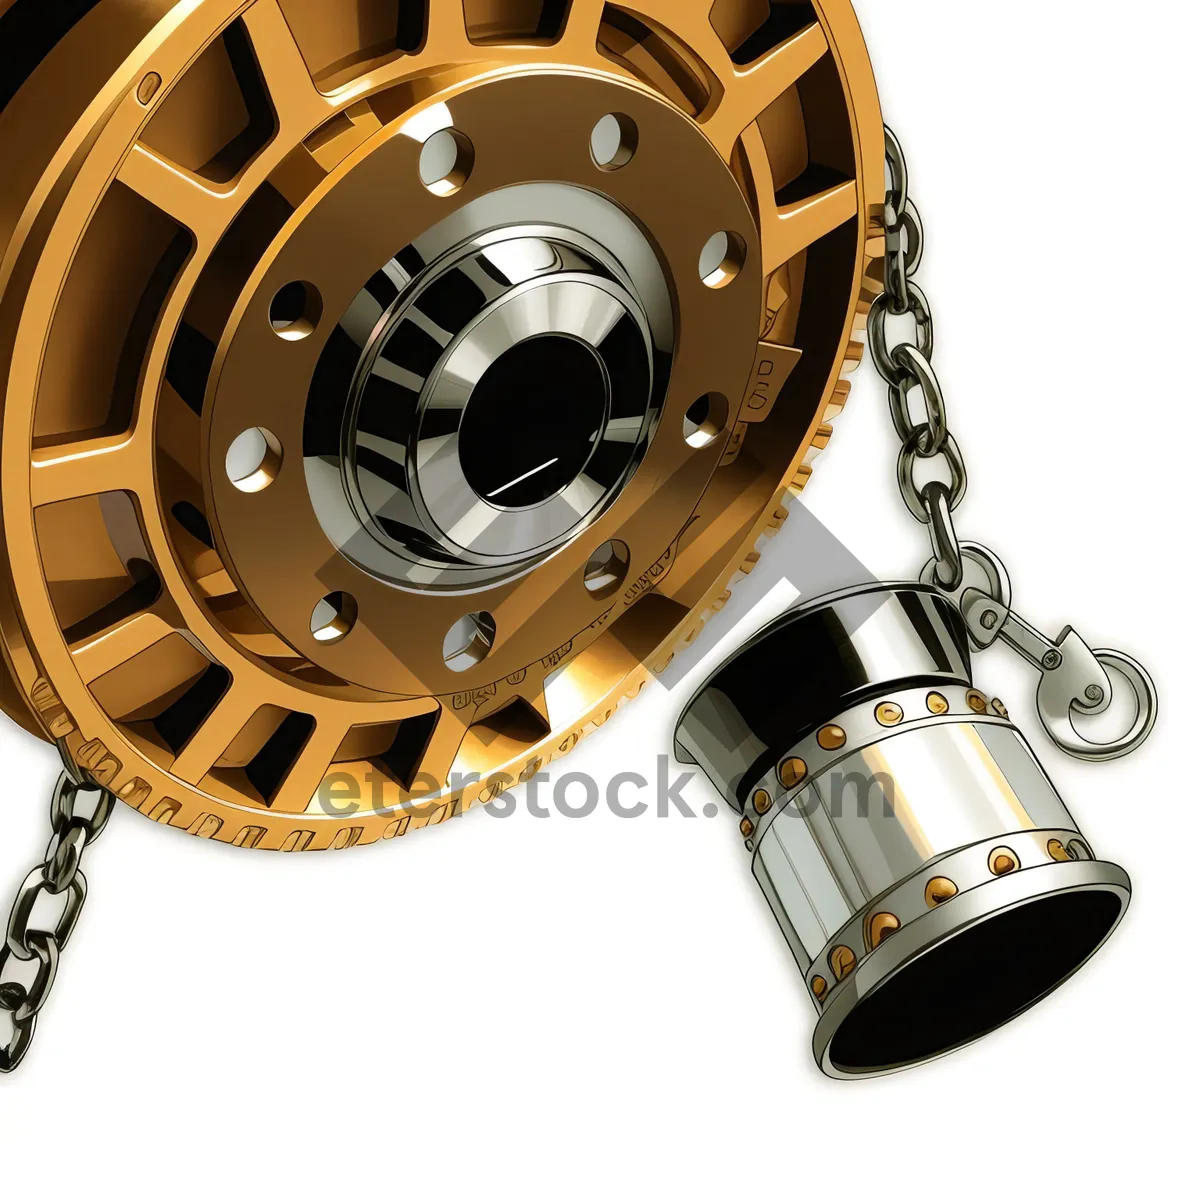 Picture of Advanced Hydraulic Brake System with Metal Gear Mechanism